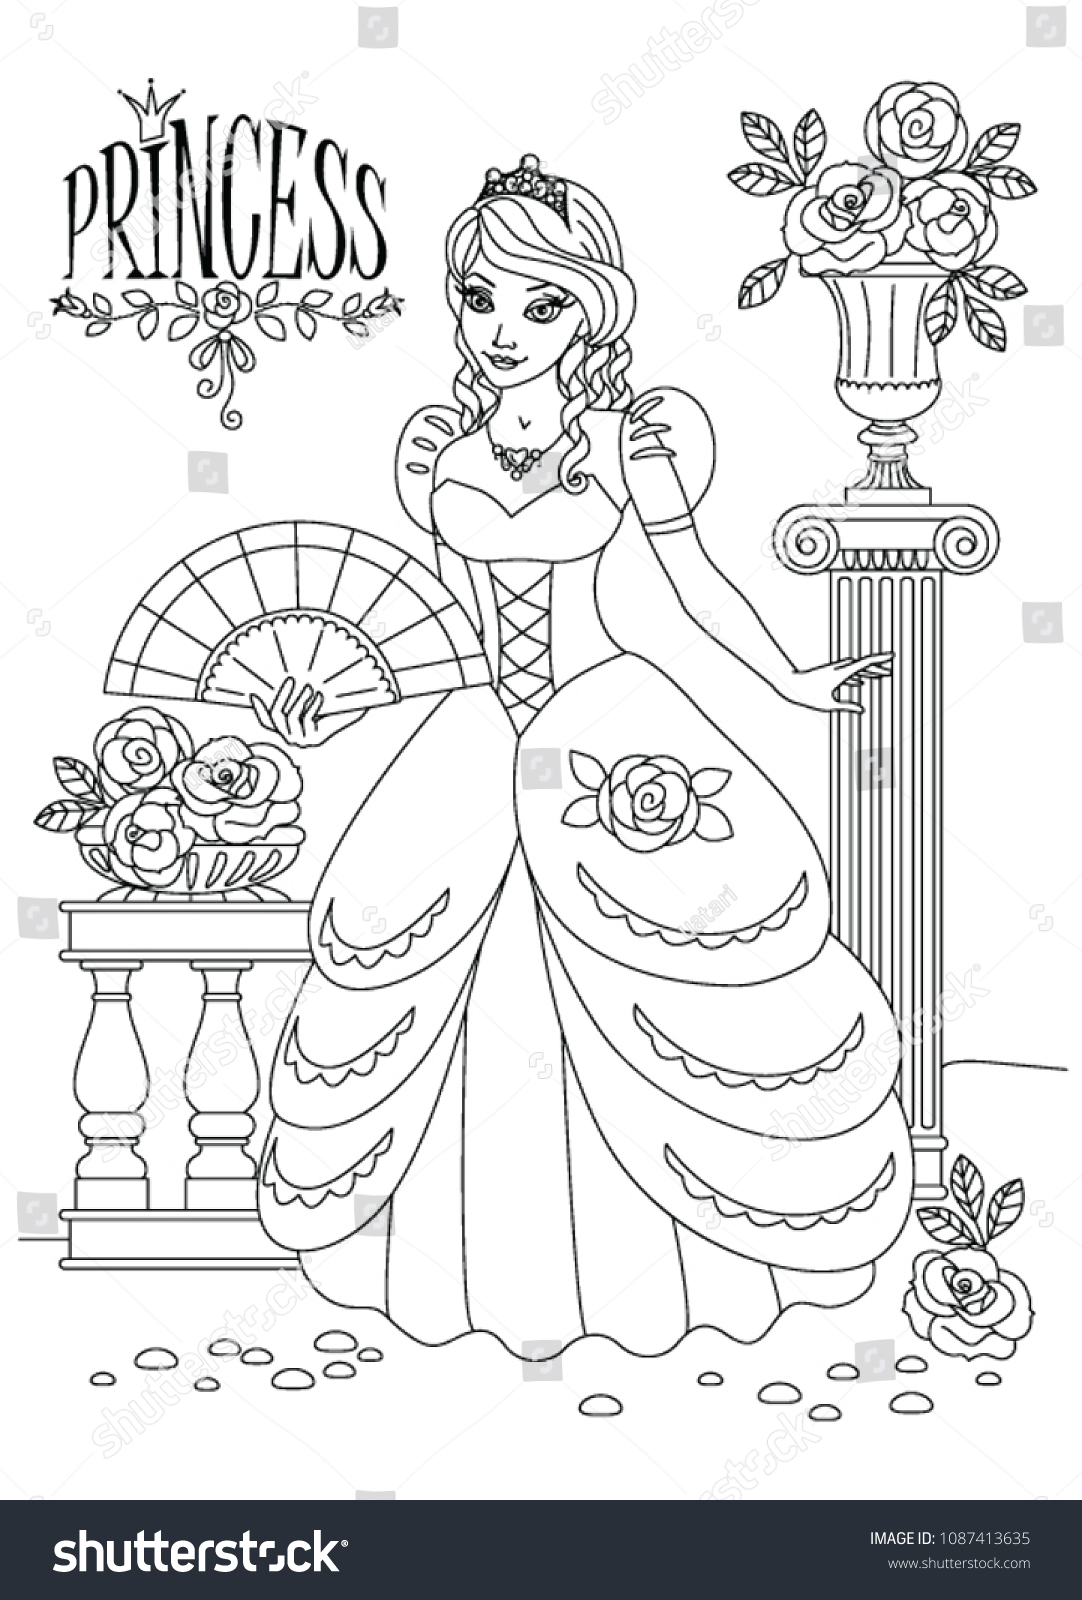 Princess Coloring Page Girl Outline Queen Stock Vector Royalty ...